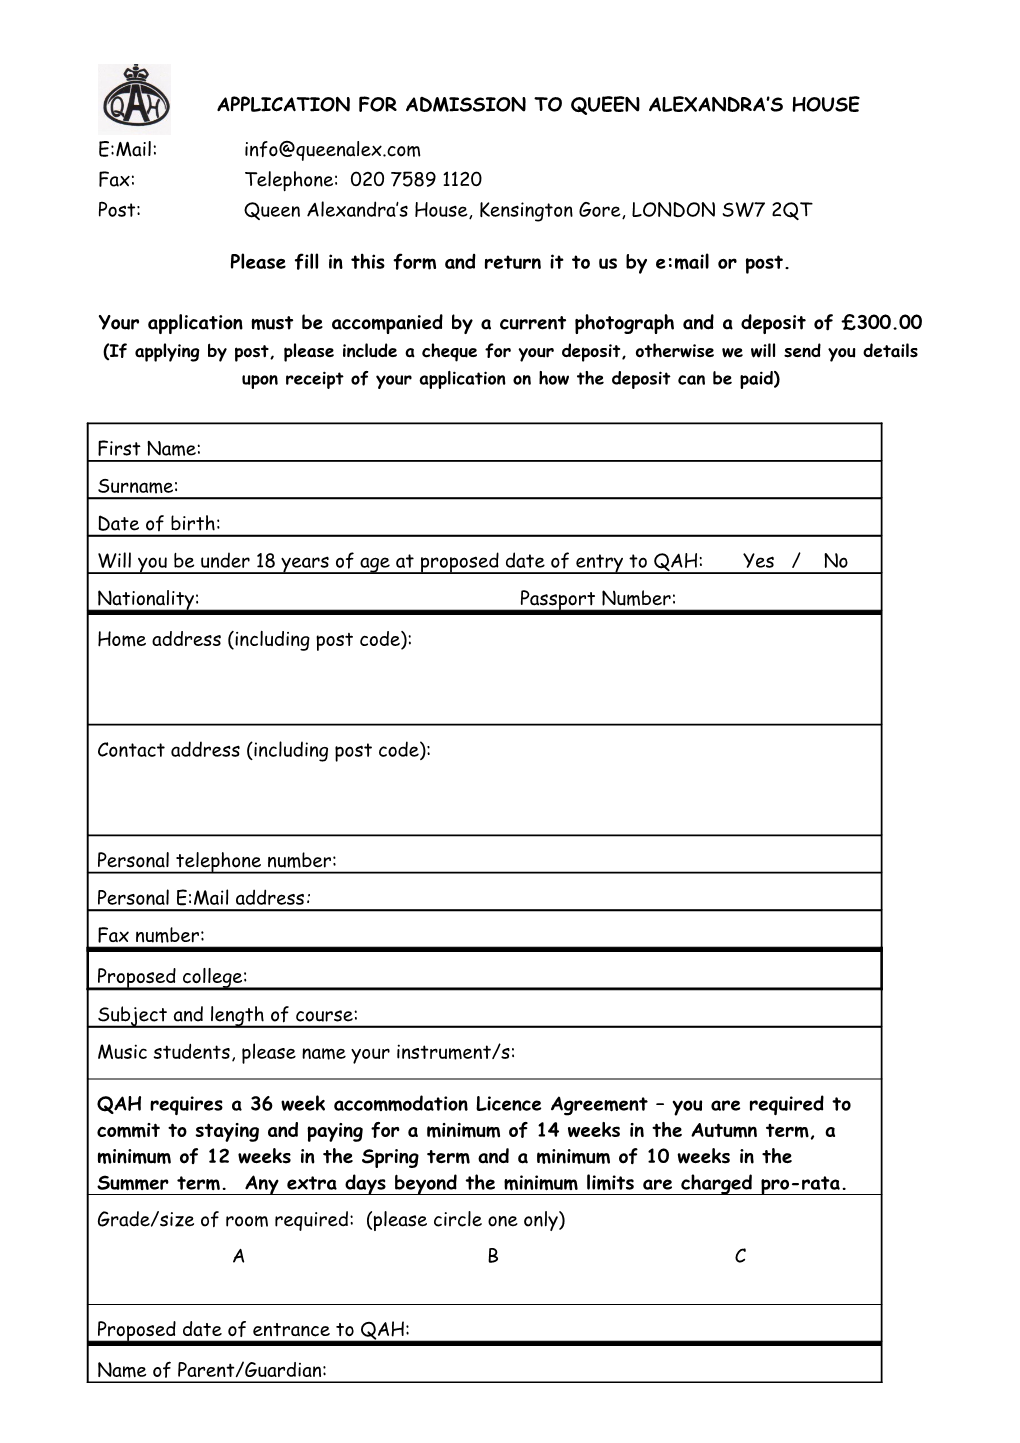 Please Fill in This Form and Return It to Us by E:Mail Or Post